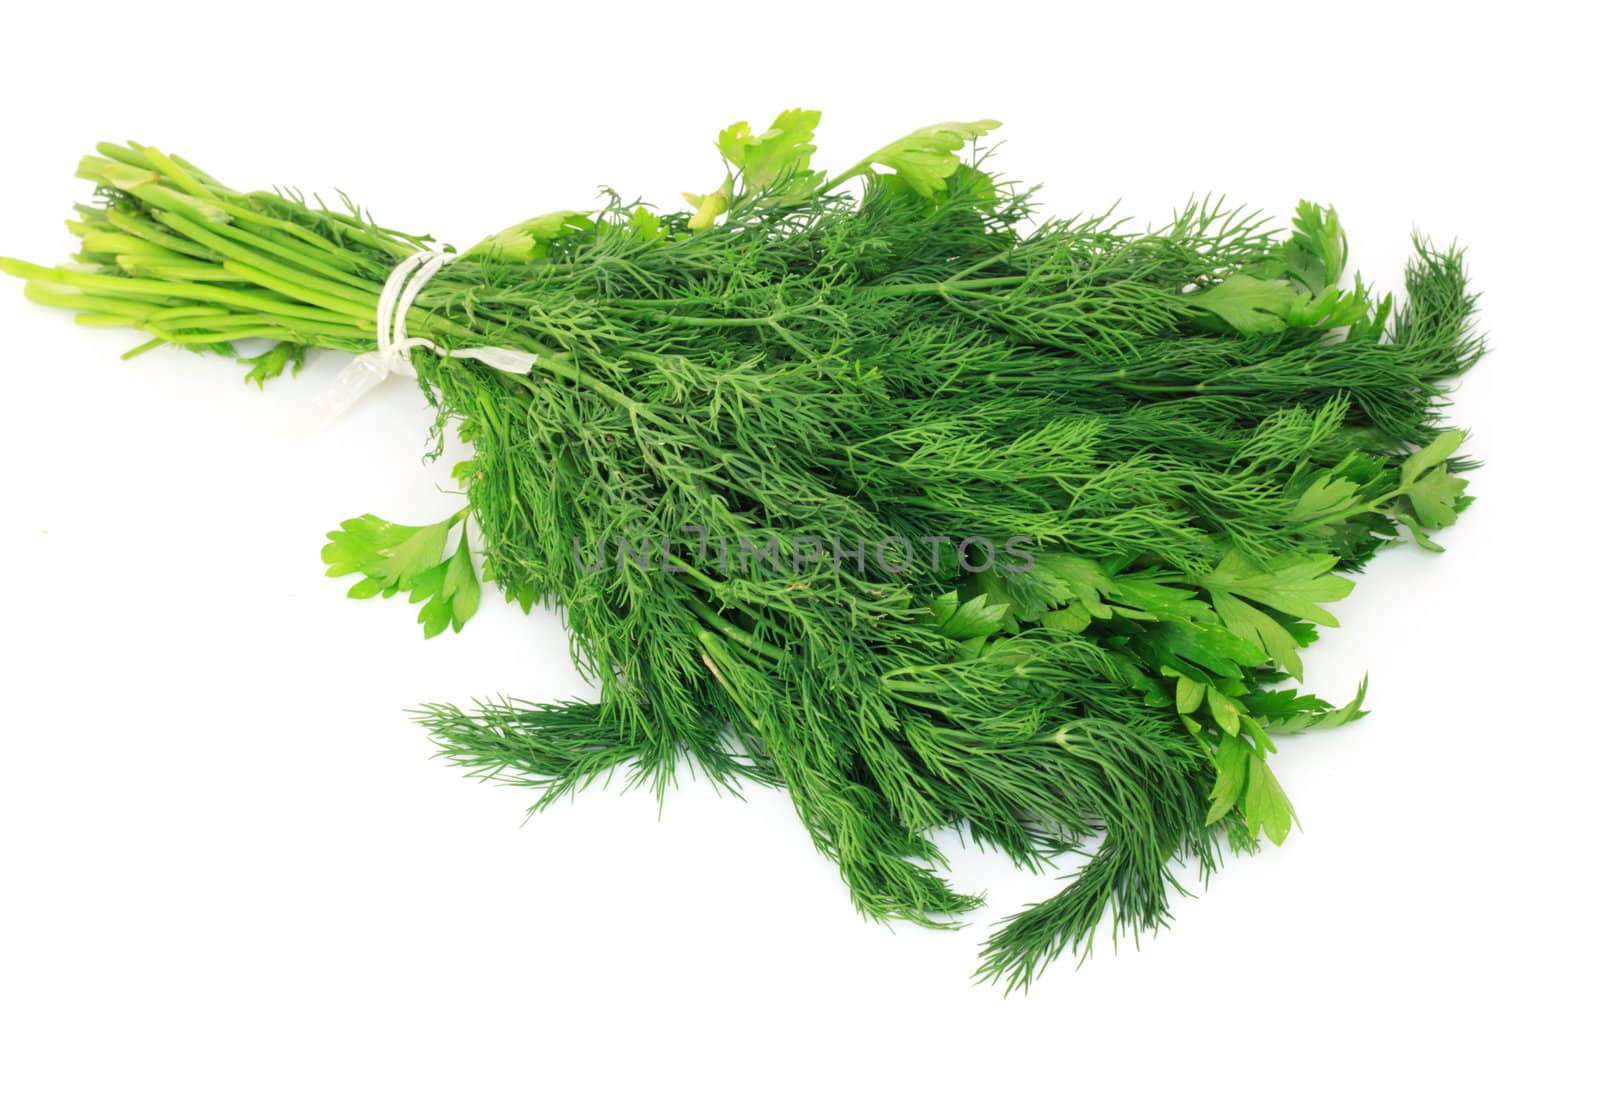 Dill and parsley isolated on a white background  by schankz